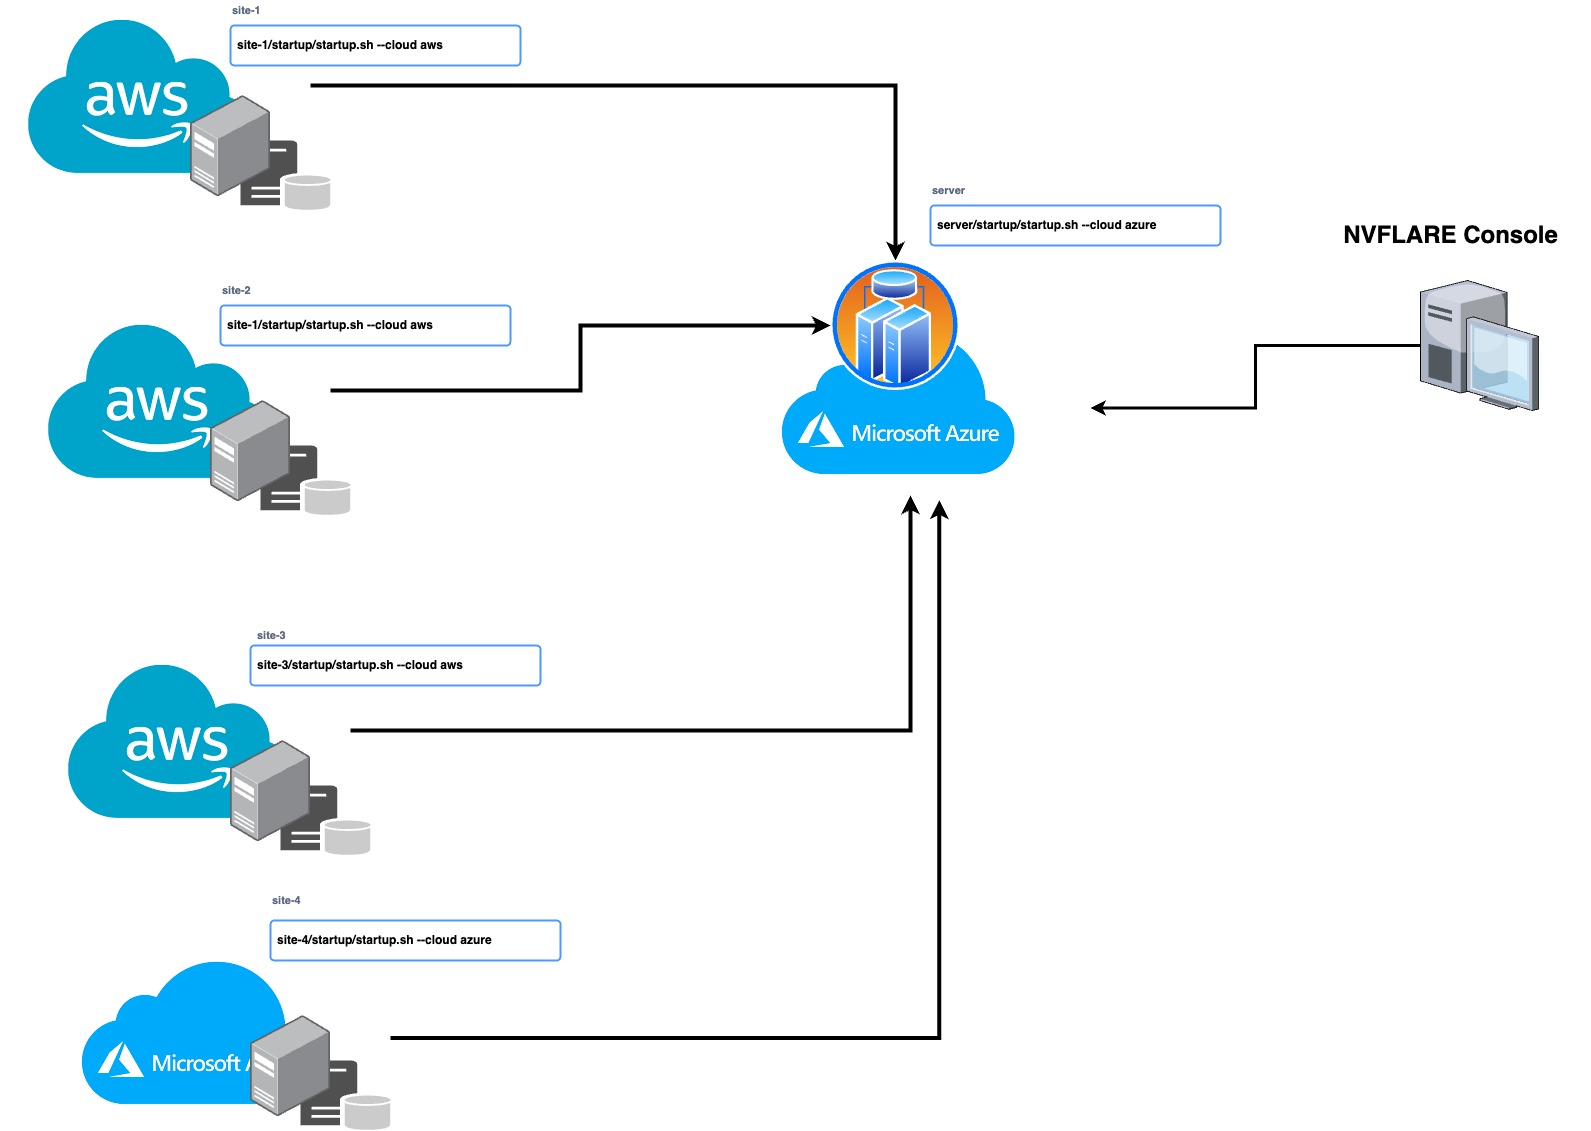 Figure 1 demonstrates the NVFlare CLI command for setting up a multi-cloud deployment. The FL Server is deployed in Azure, while three FL clients (site-1, site-2, site-3) and an additional client (site-4) are deployed on Azure. To manage the deployment, an NFLARE Console Client is deployed on-premise. The NVFLARE CLI command utilizes Azure and AWS infrastructure-as-code APIs to create and configure VM instances, networking, security groups, and other resources. It streamlines the process of deploying and starting the NVFLARE system, enabling organizations to establish a scalable and reliable multi-cloud setup.
